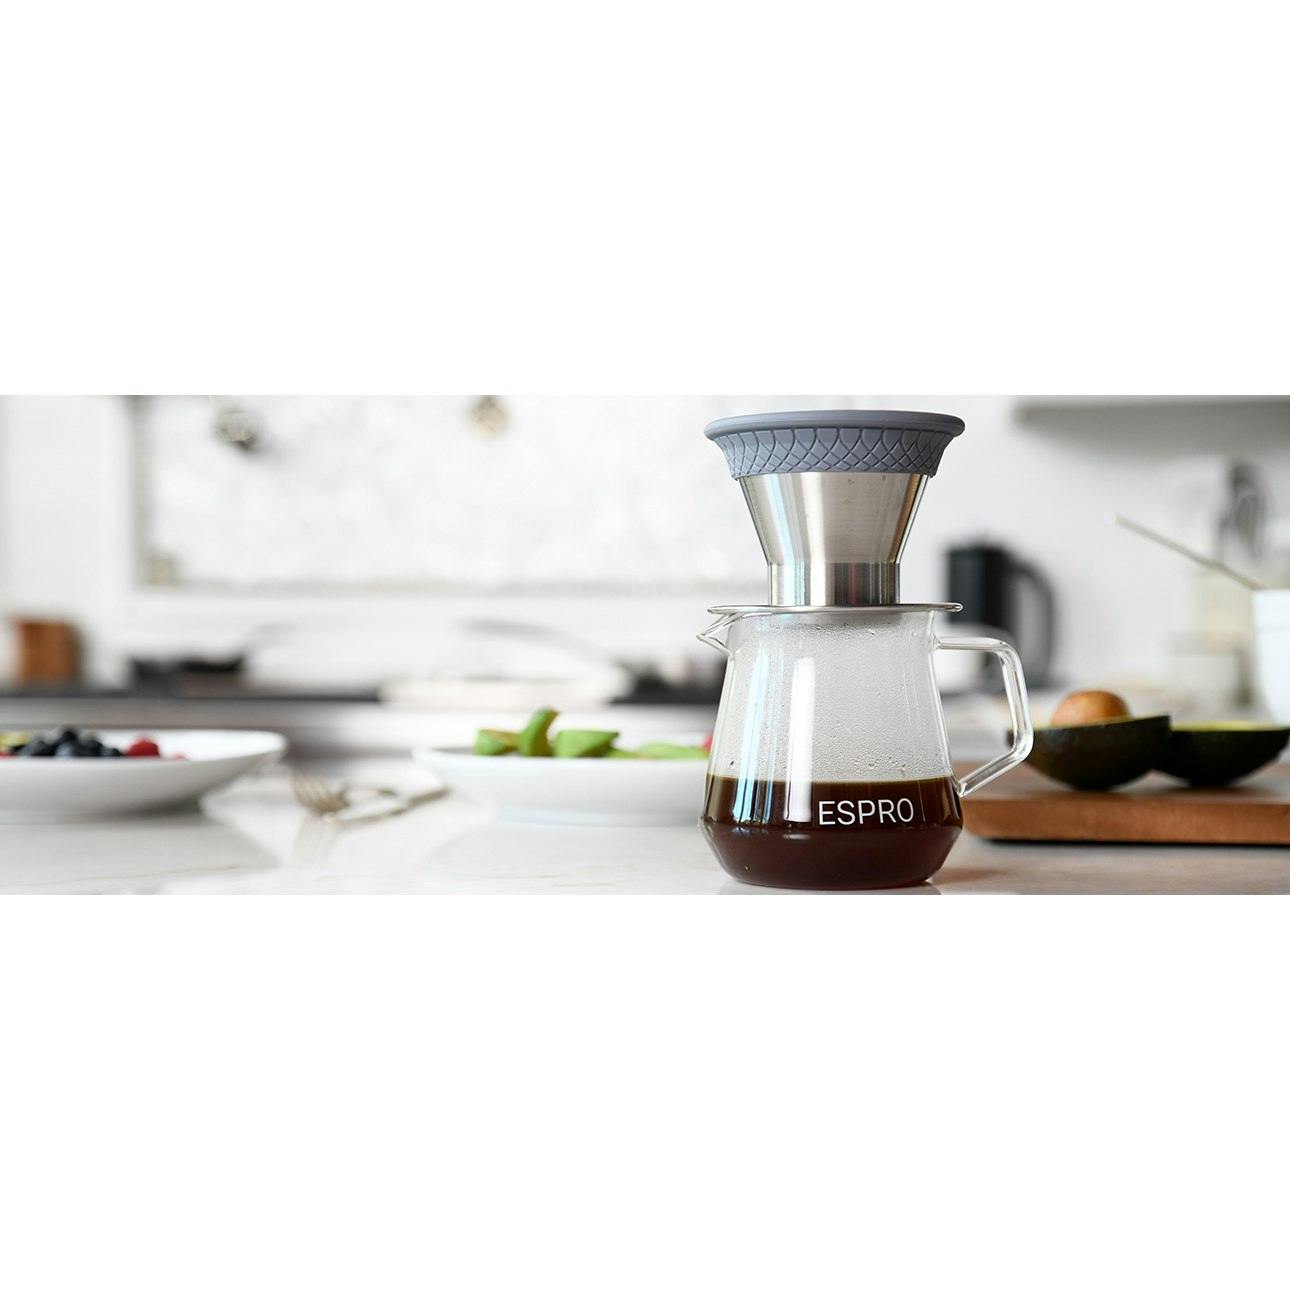 Espro Bloom Pour Over Coffee Brewer, 18 oz